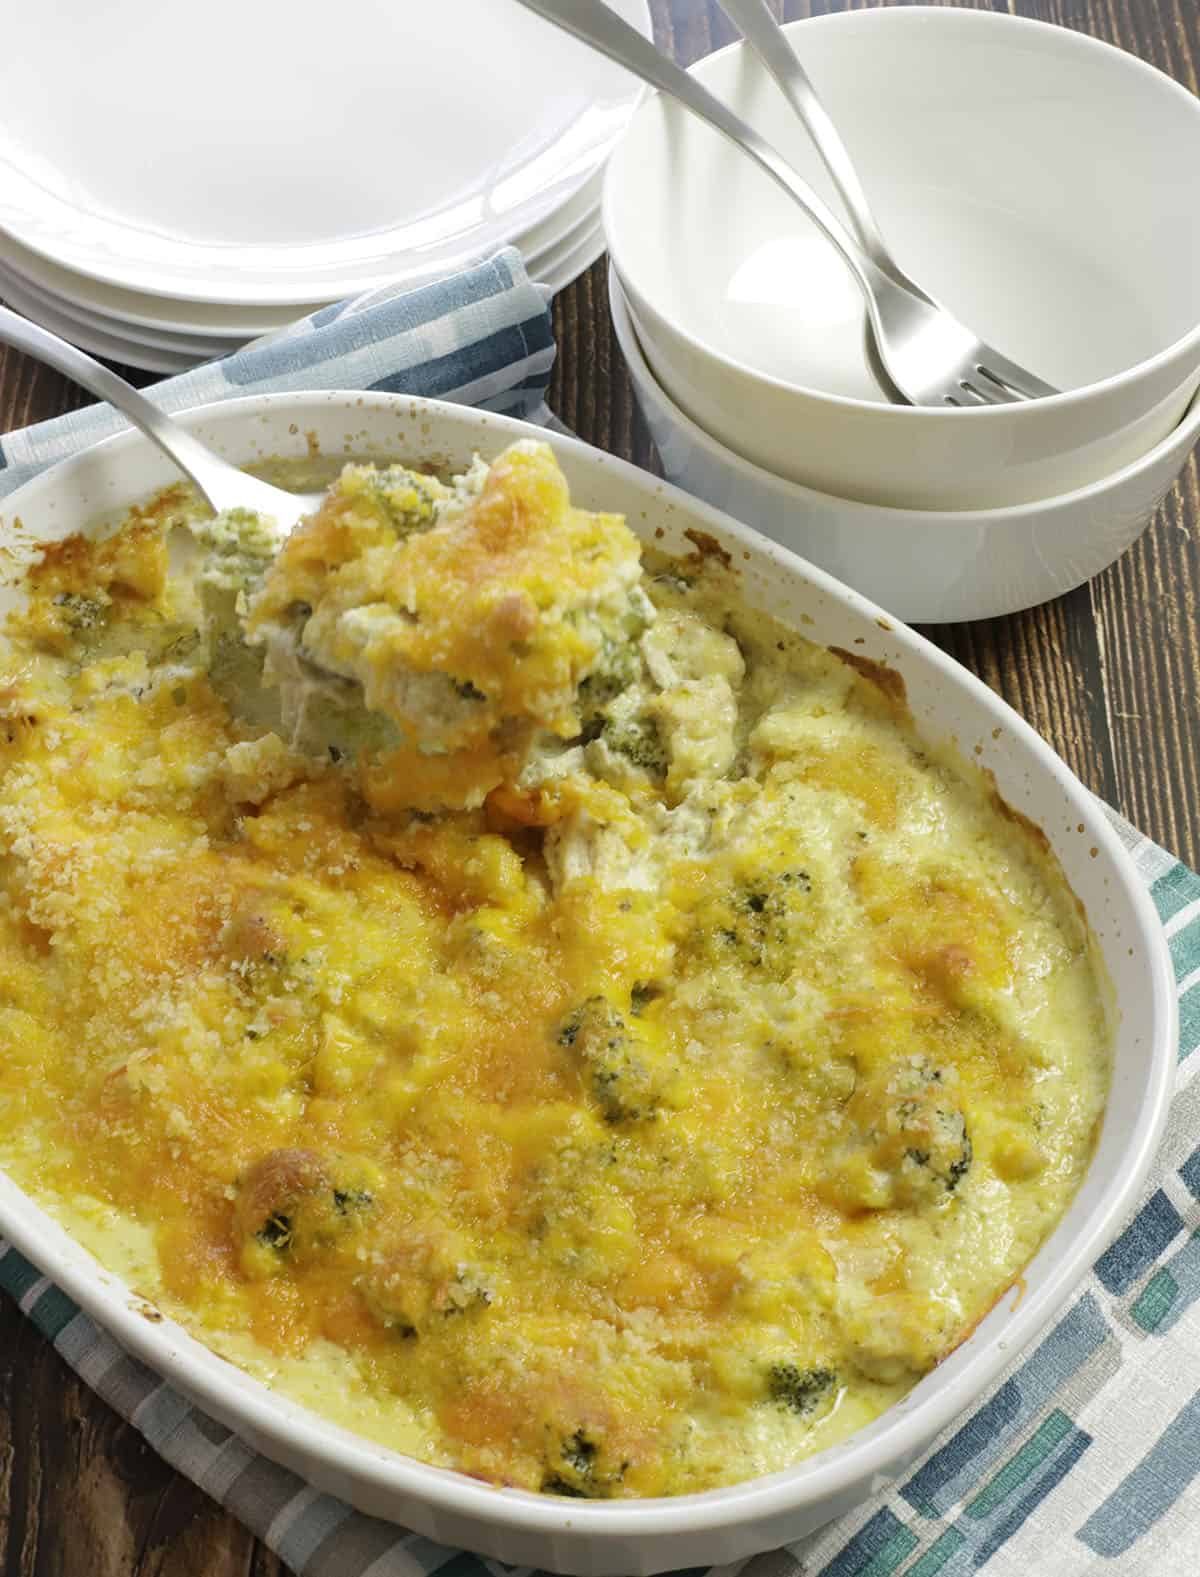 Baked casserole in oval white dish with silver spoon scooping out. 